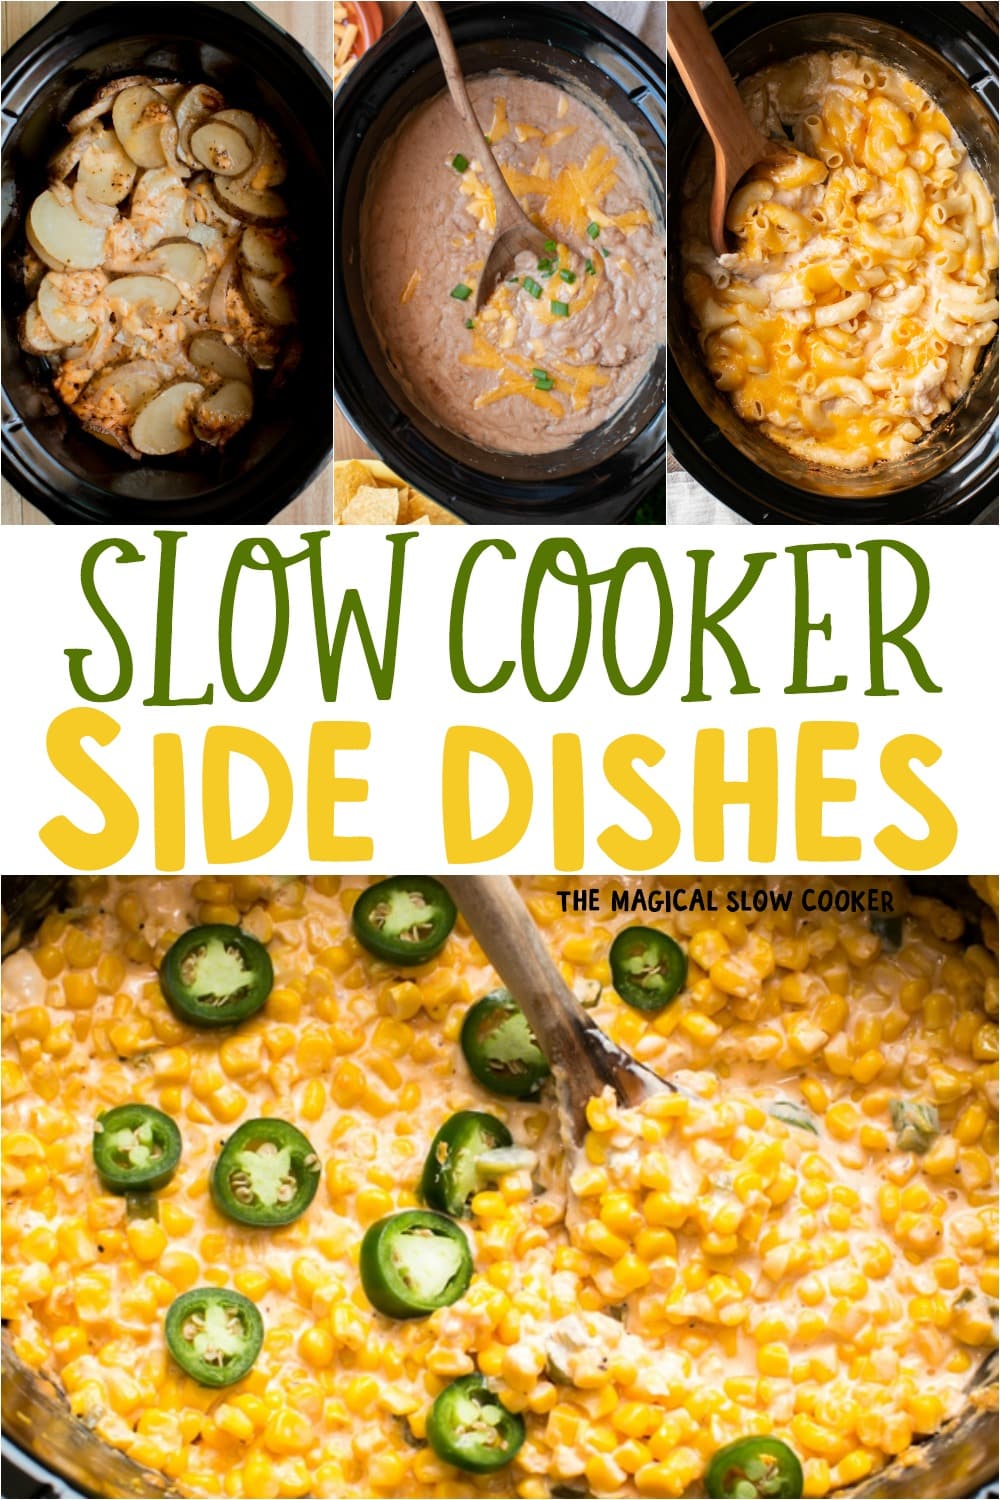 11 Easy Slow Cooker Side Dishes The Magical Slow Cooker